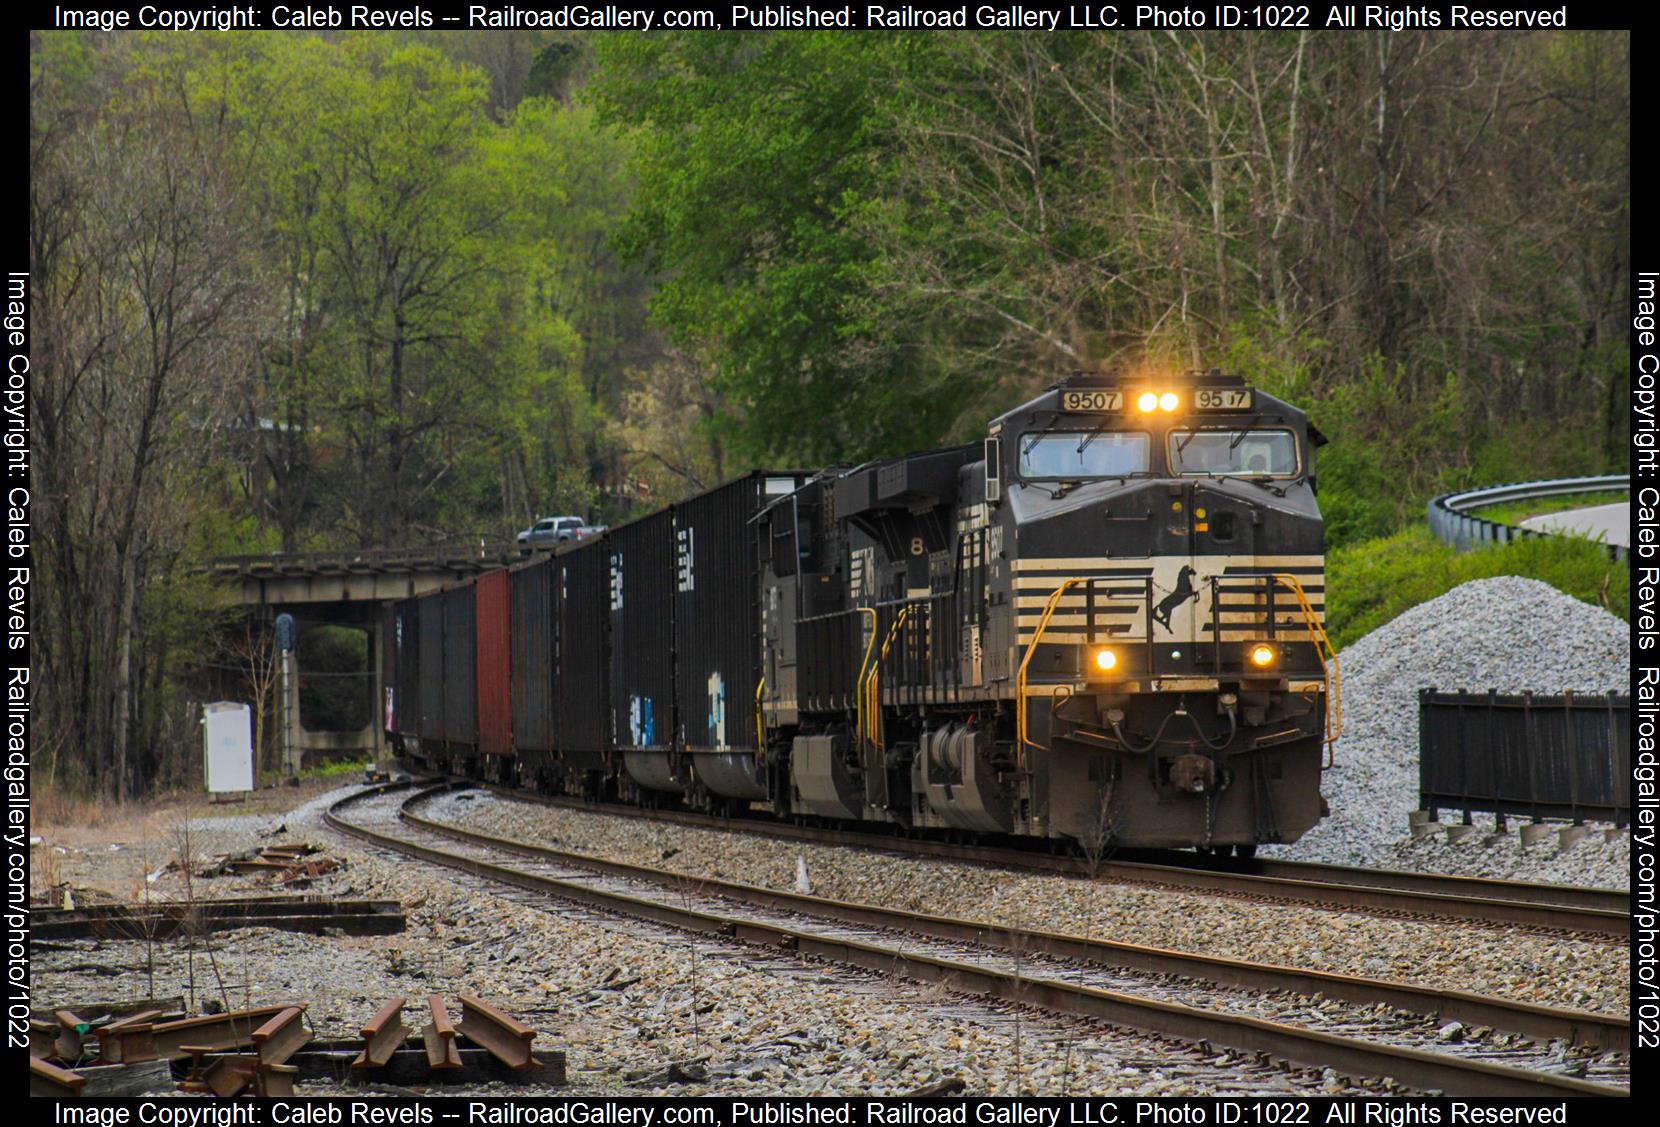 NS 9507 is a class GE C44-9W (Dash 9-44CW) and  is pictured in Old Fort, North Carolina, USA.  This was taken along the Norfolk Southern S Line on the Norfolk Southern. Photo Copyright: Caleb Revels uploaded to Railroad Gallery on 05/02/2023. This photograph of NS 9507 was taken on Monday, April 03, 2023. All Rights Reserved. 